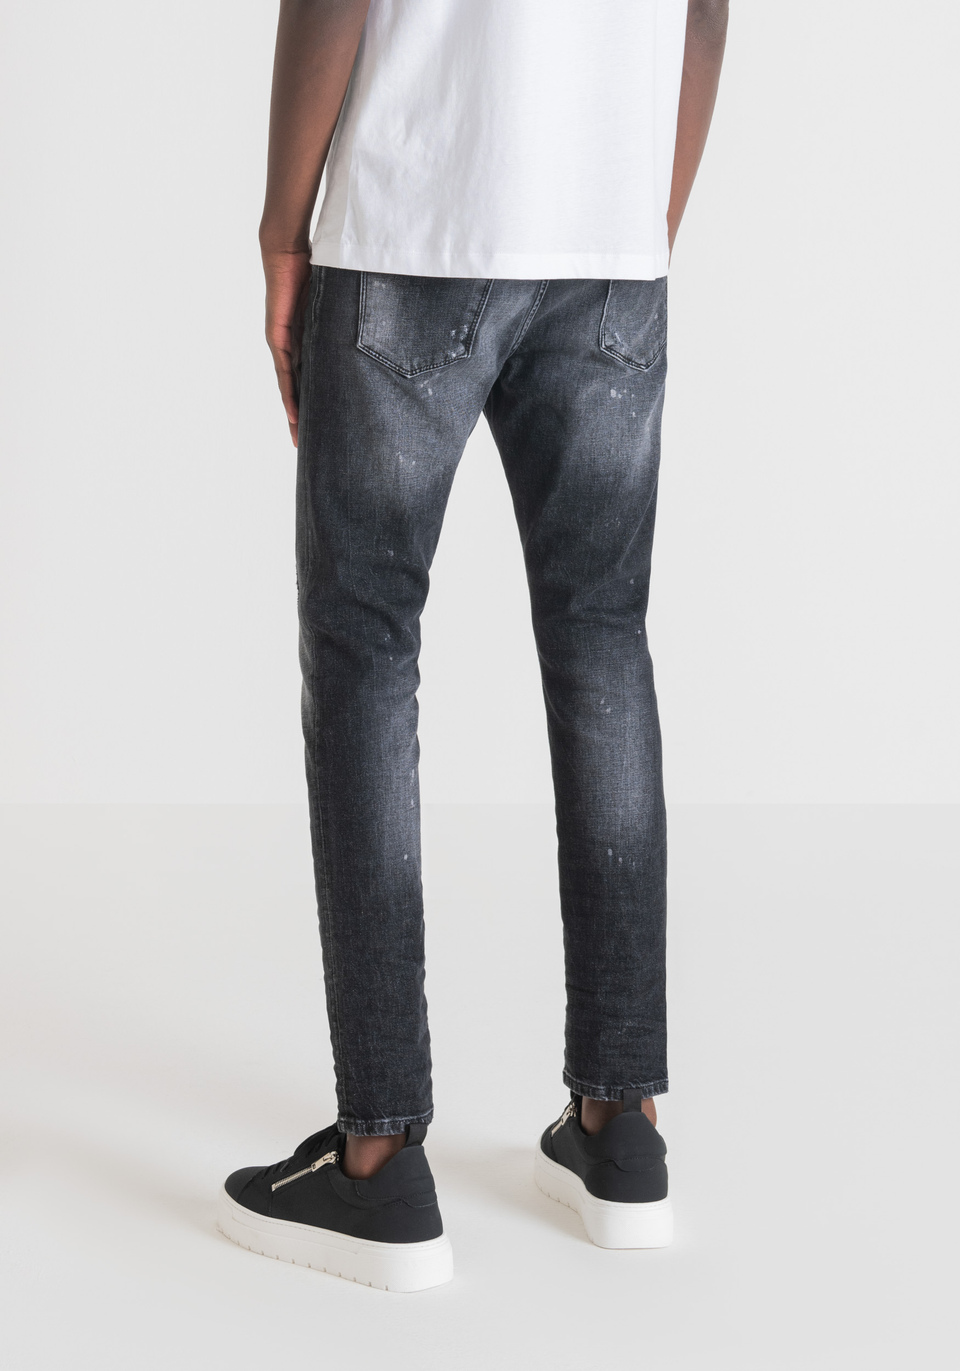 JEANS CARROT FIT “KENNY” IN MATERIALE RICICLATO - Antony Morato Online Shop